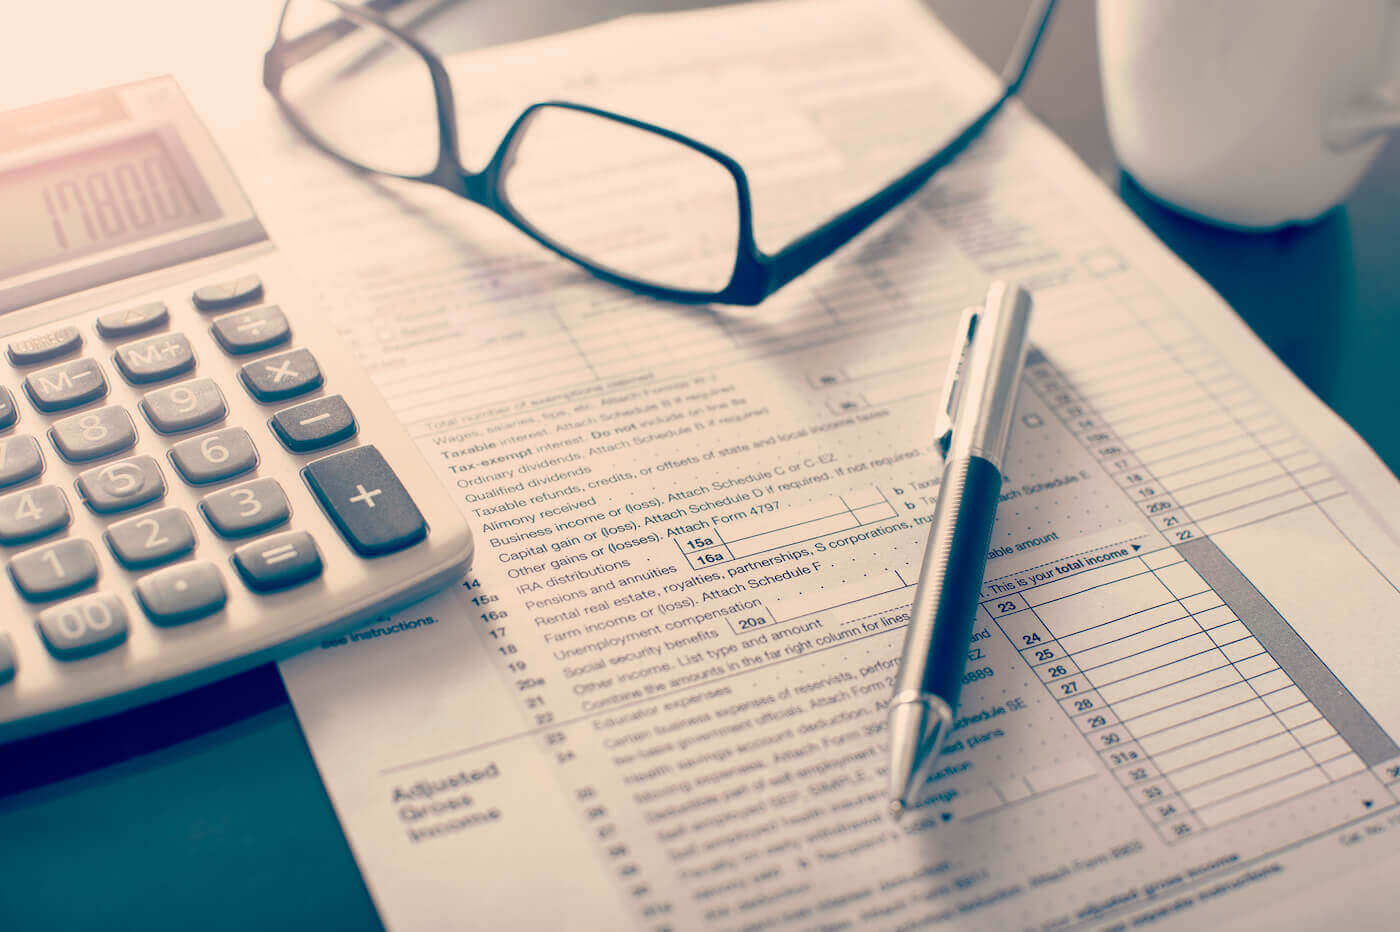 Income tax return form sitting under a calculator, pen, and glasses